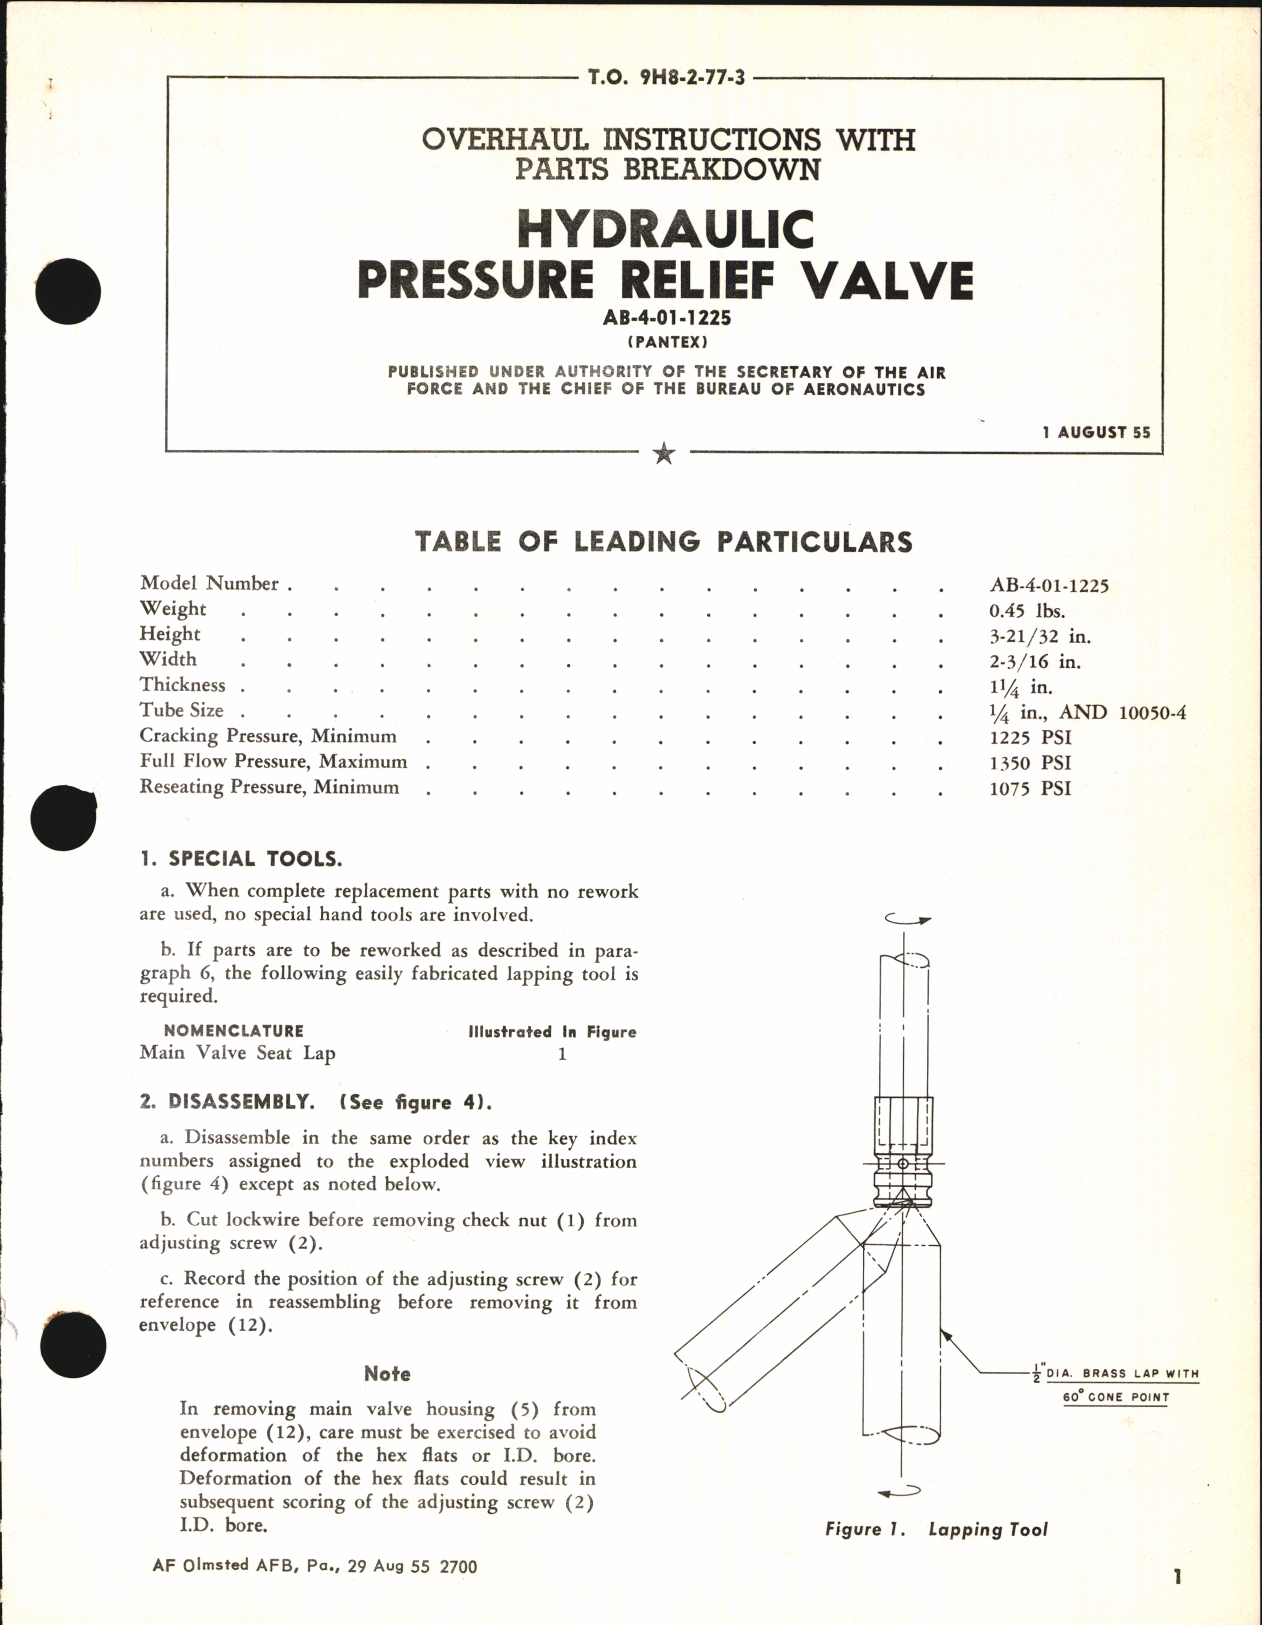 Sample page 1 from AirCorps Library document: Overhaul Instructions with Parts Breakdown for Hydraulic Pressure Relief Valve AB-4-01-1225